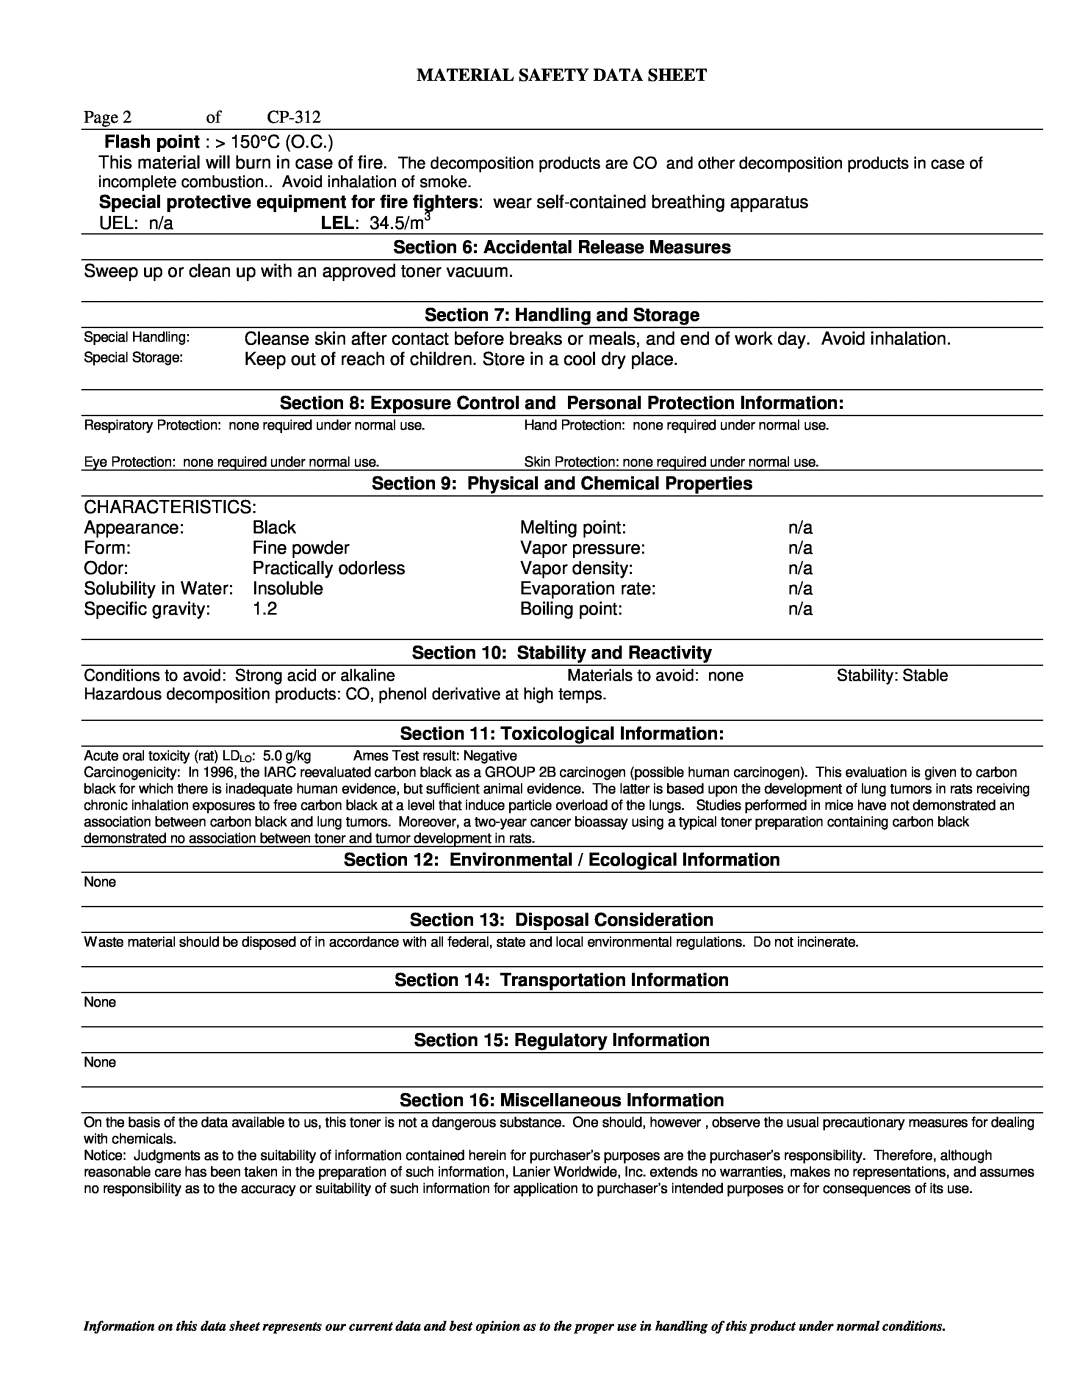 Lanier PSW-6 manual Material Safety Data Sheet, Accidental Release Measures 